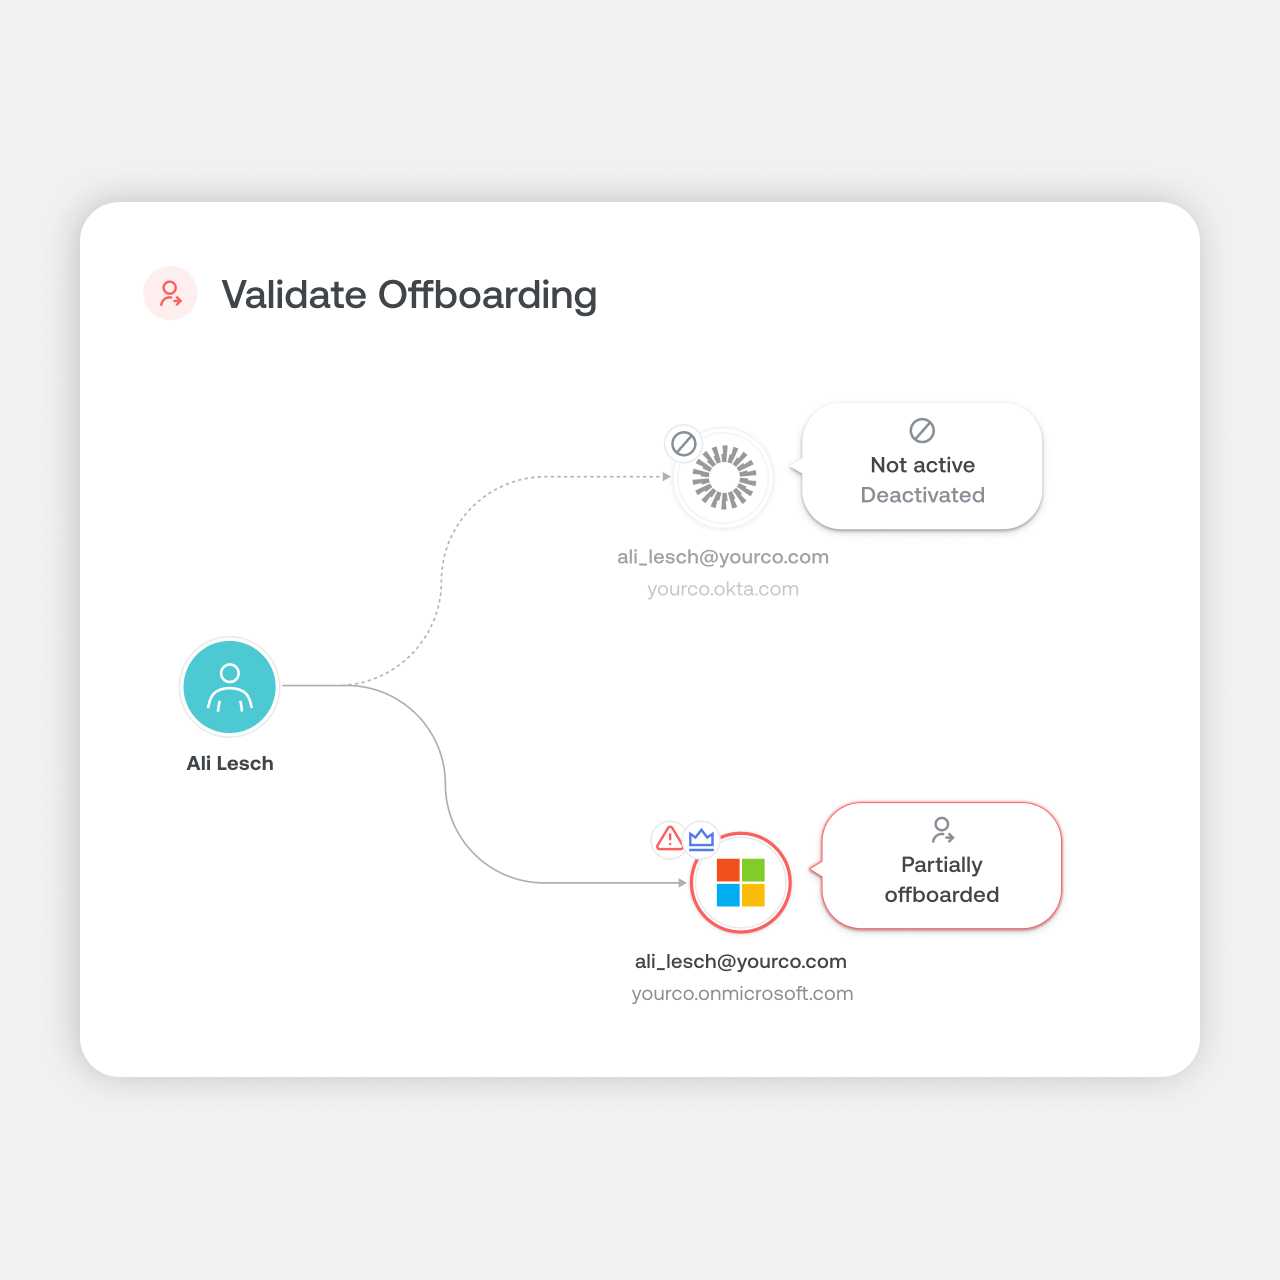 Image showing how to validate offboarding